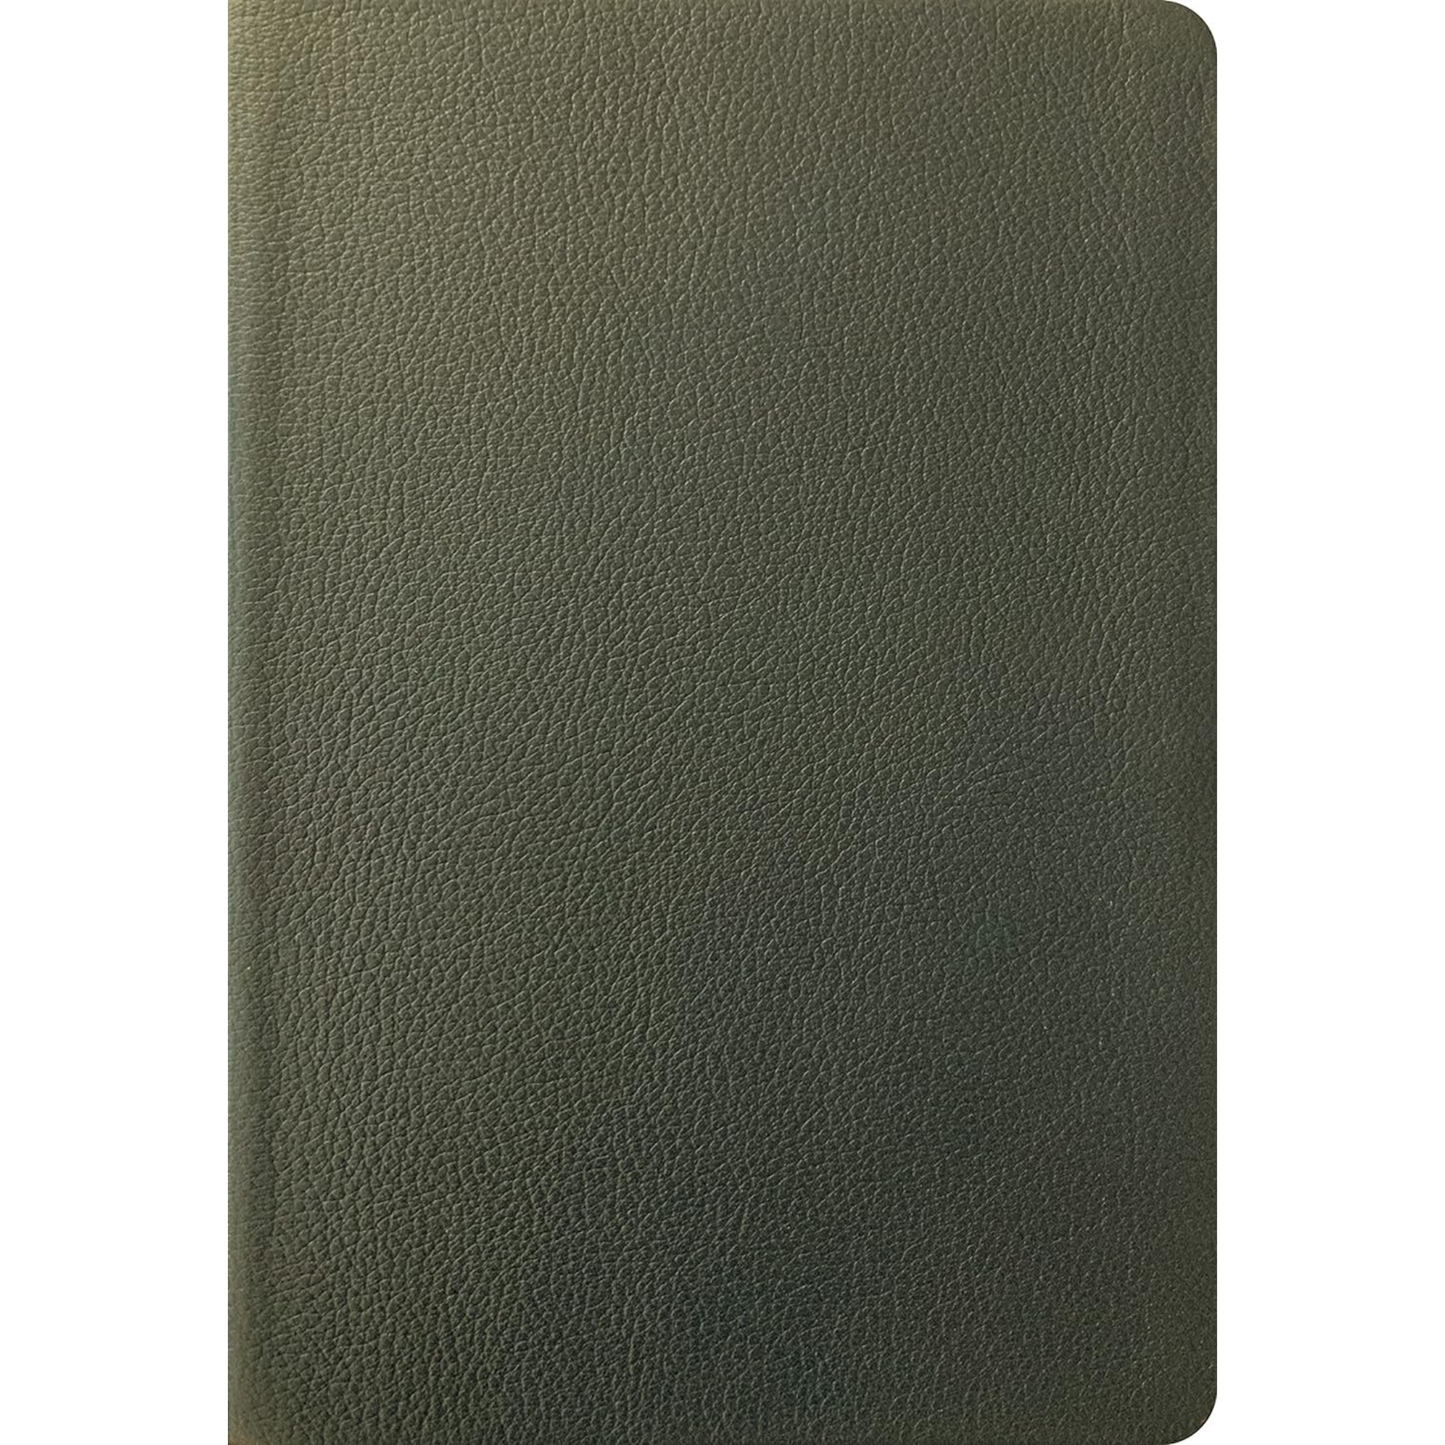 NLT Large Print Thinline Reference, Filament Enabled Edition, Olive Green Genuine Leather